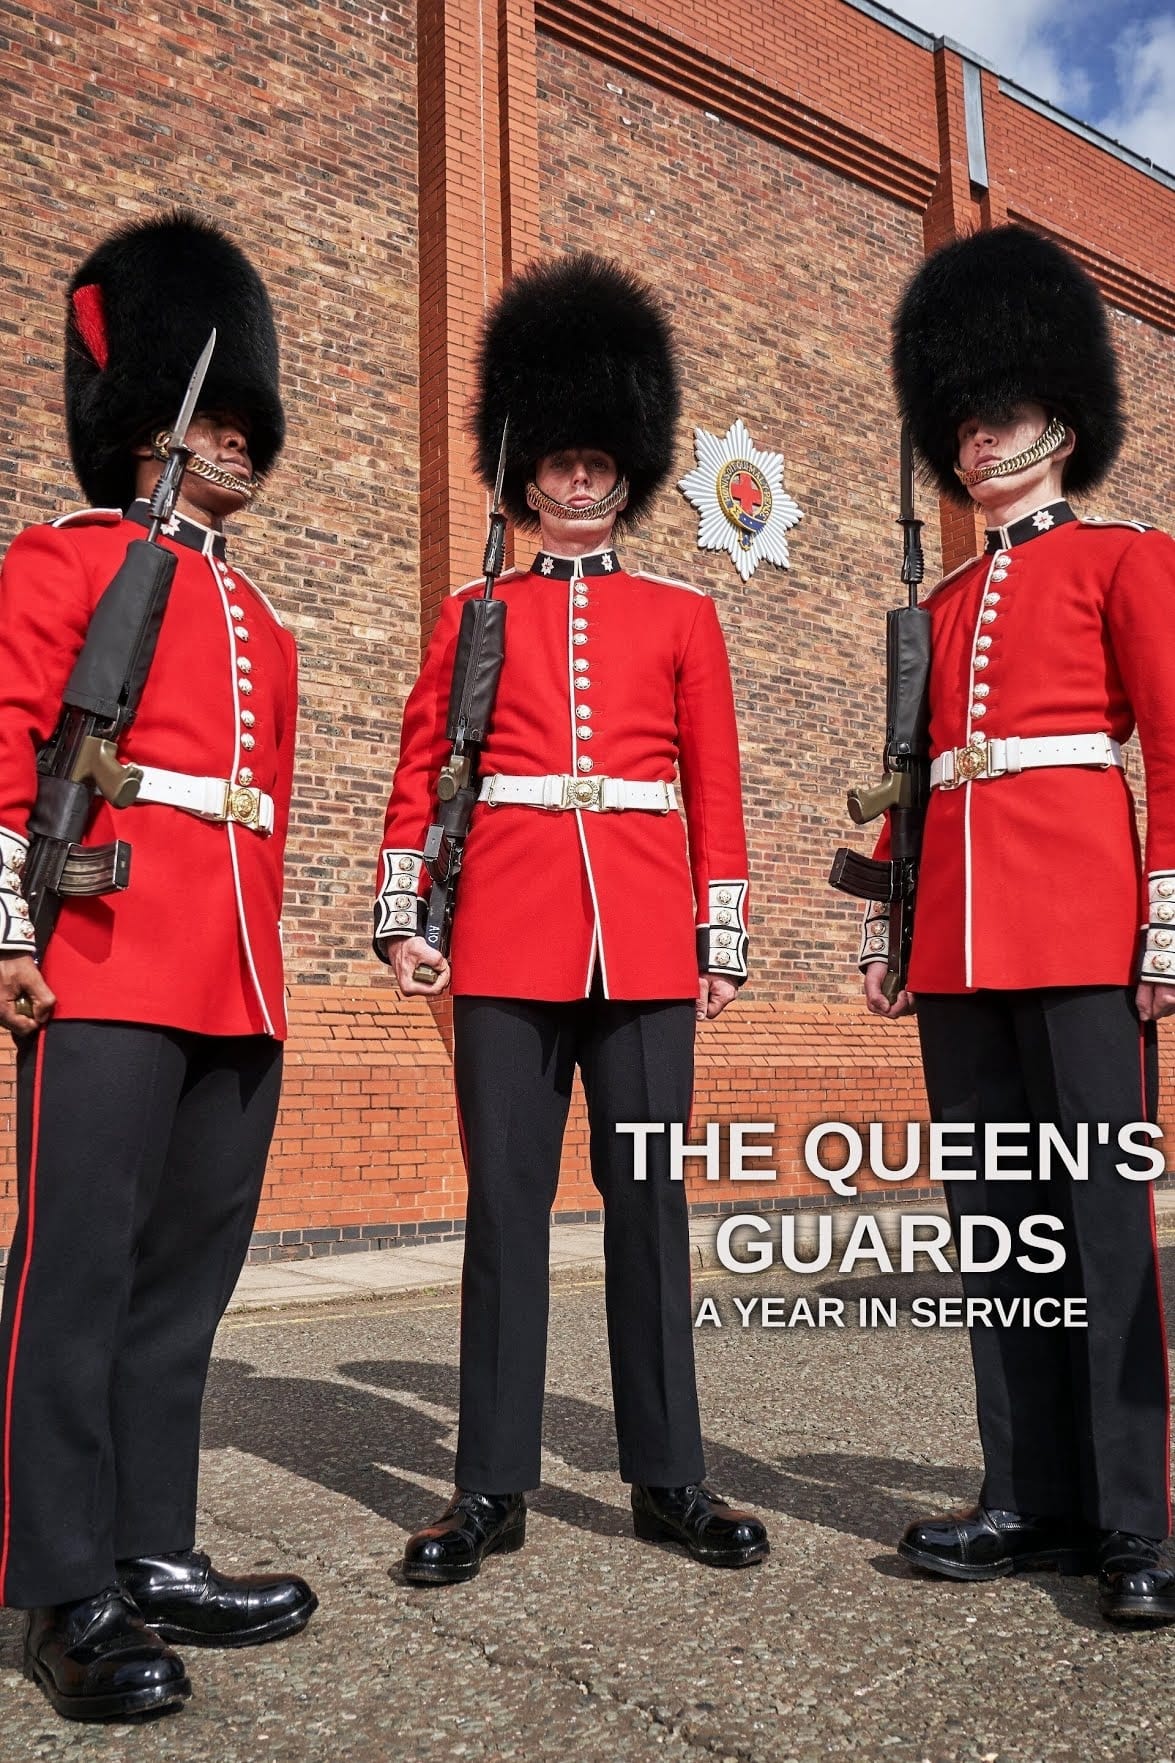 The Queen's Guards: On Her Majesty's Service TV Shows About British Army